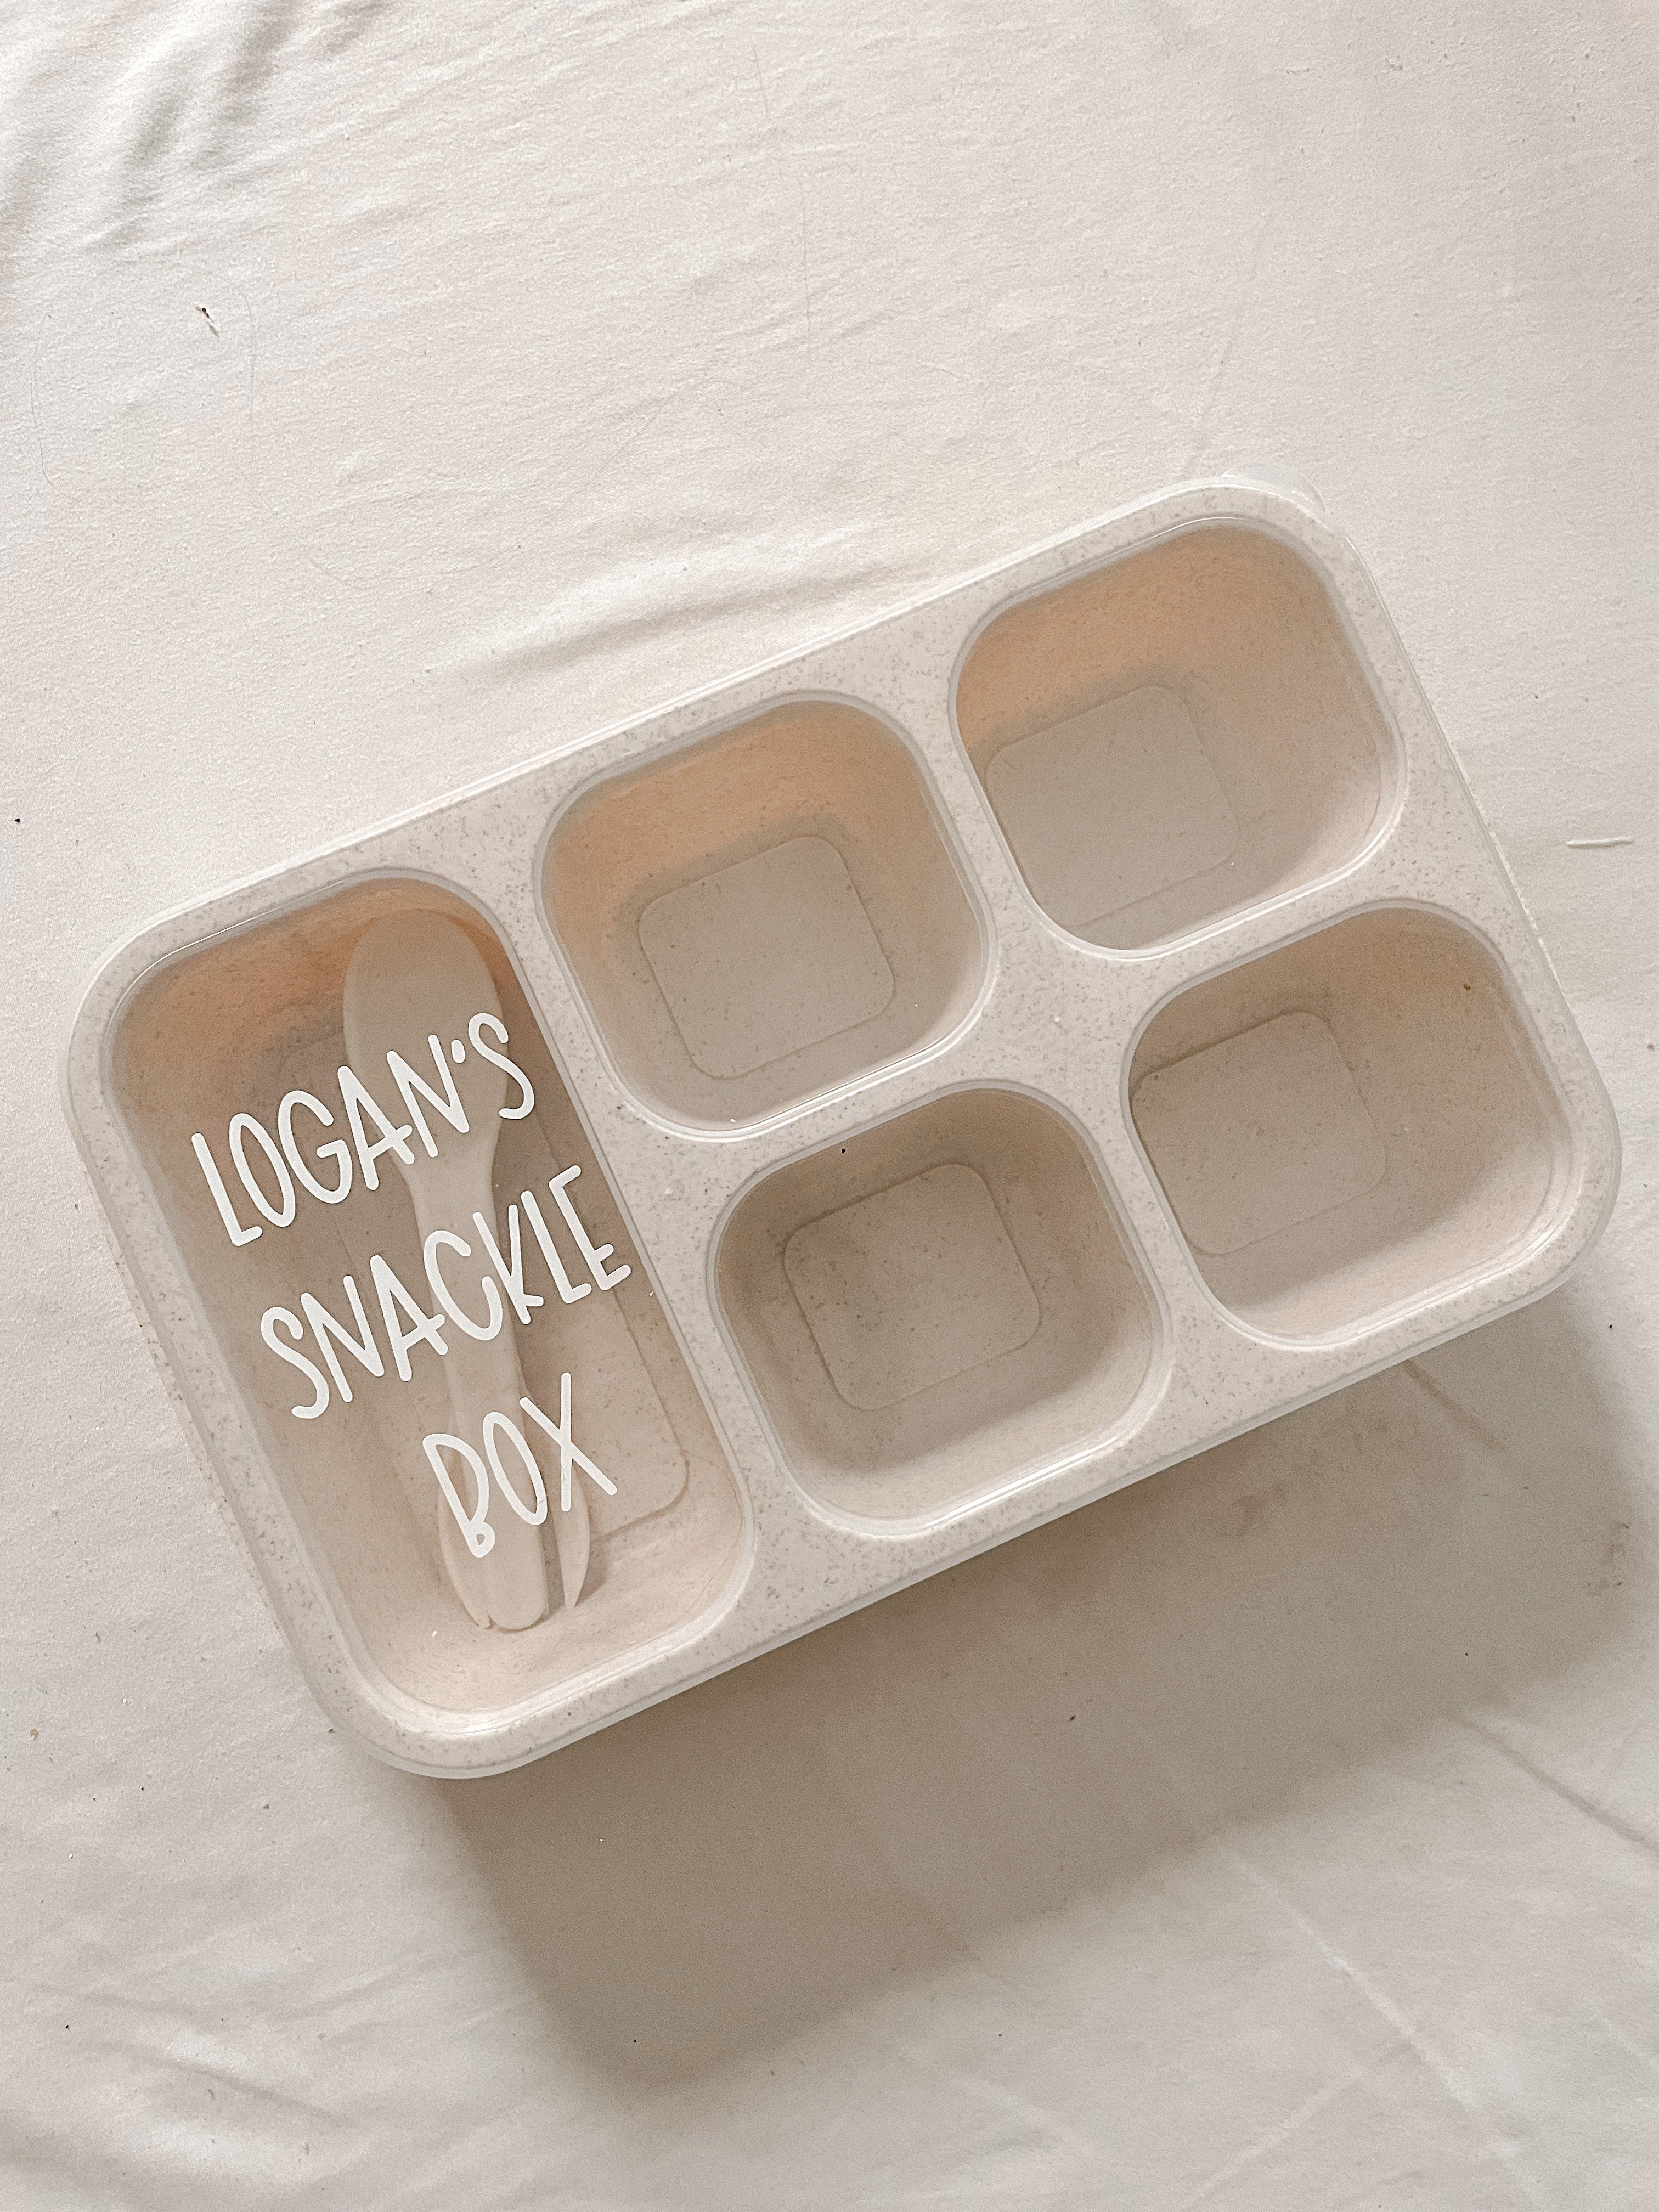 Kids Snackle Boxes